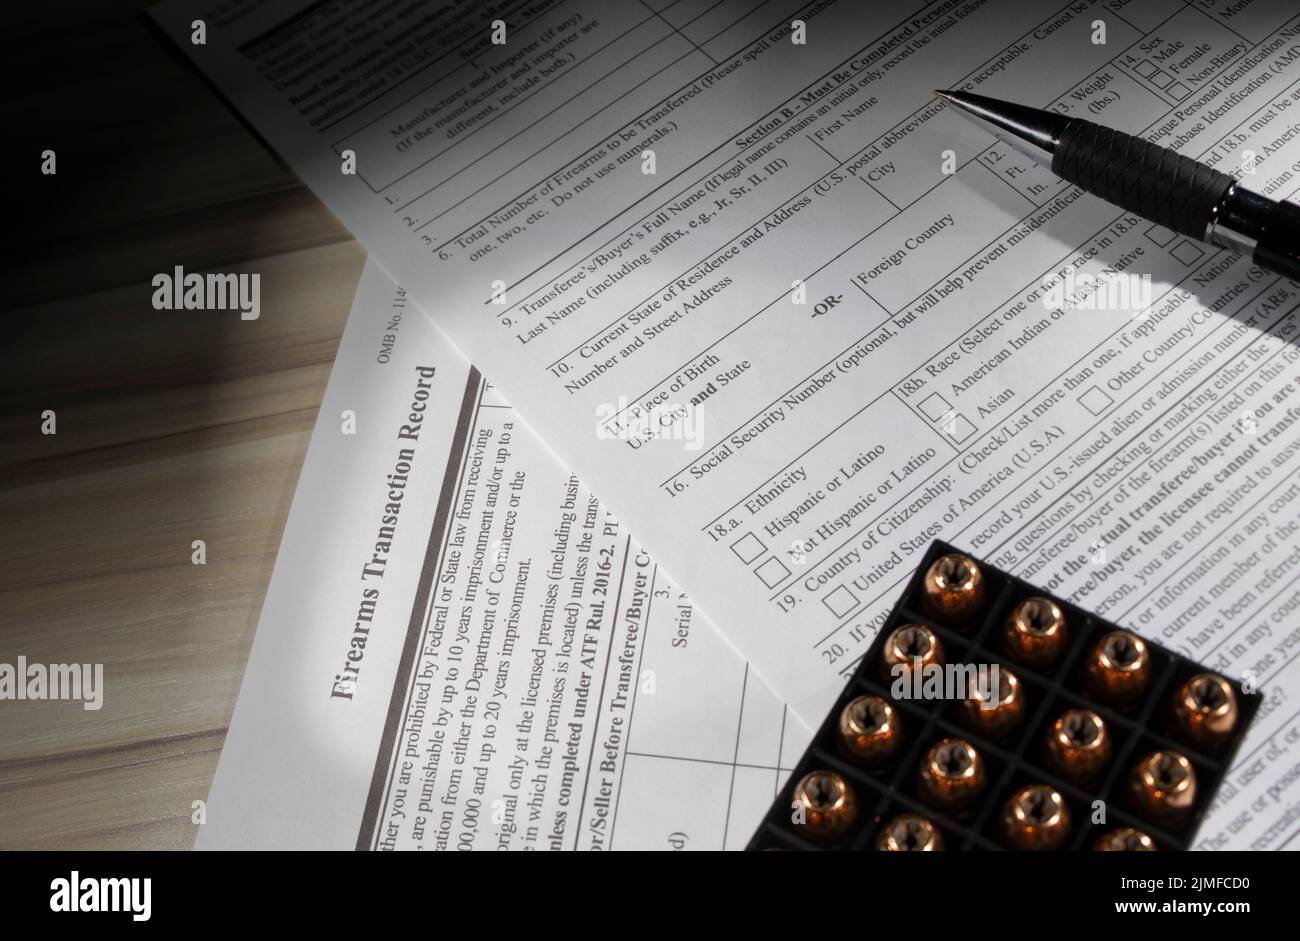 Box of ammunition with pen resting on the public domain forms that are used by the FBI for NICS background checks. Stock Photo